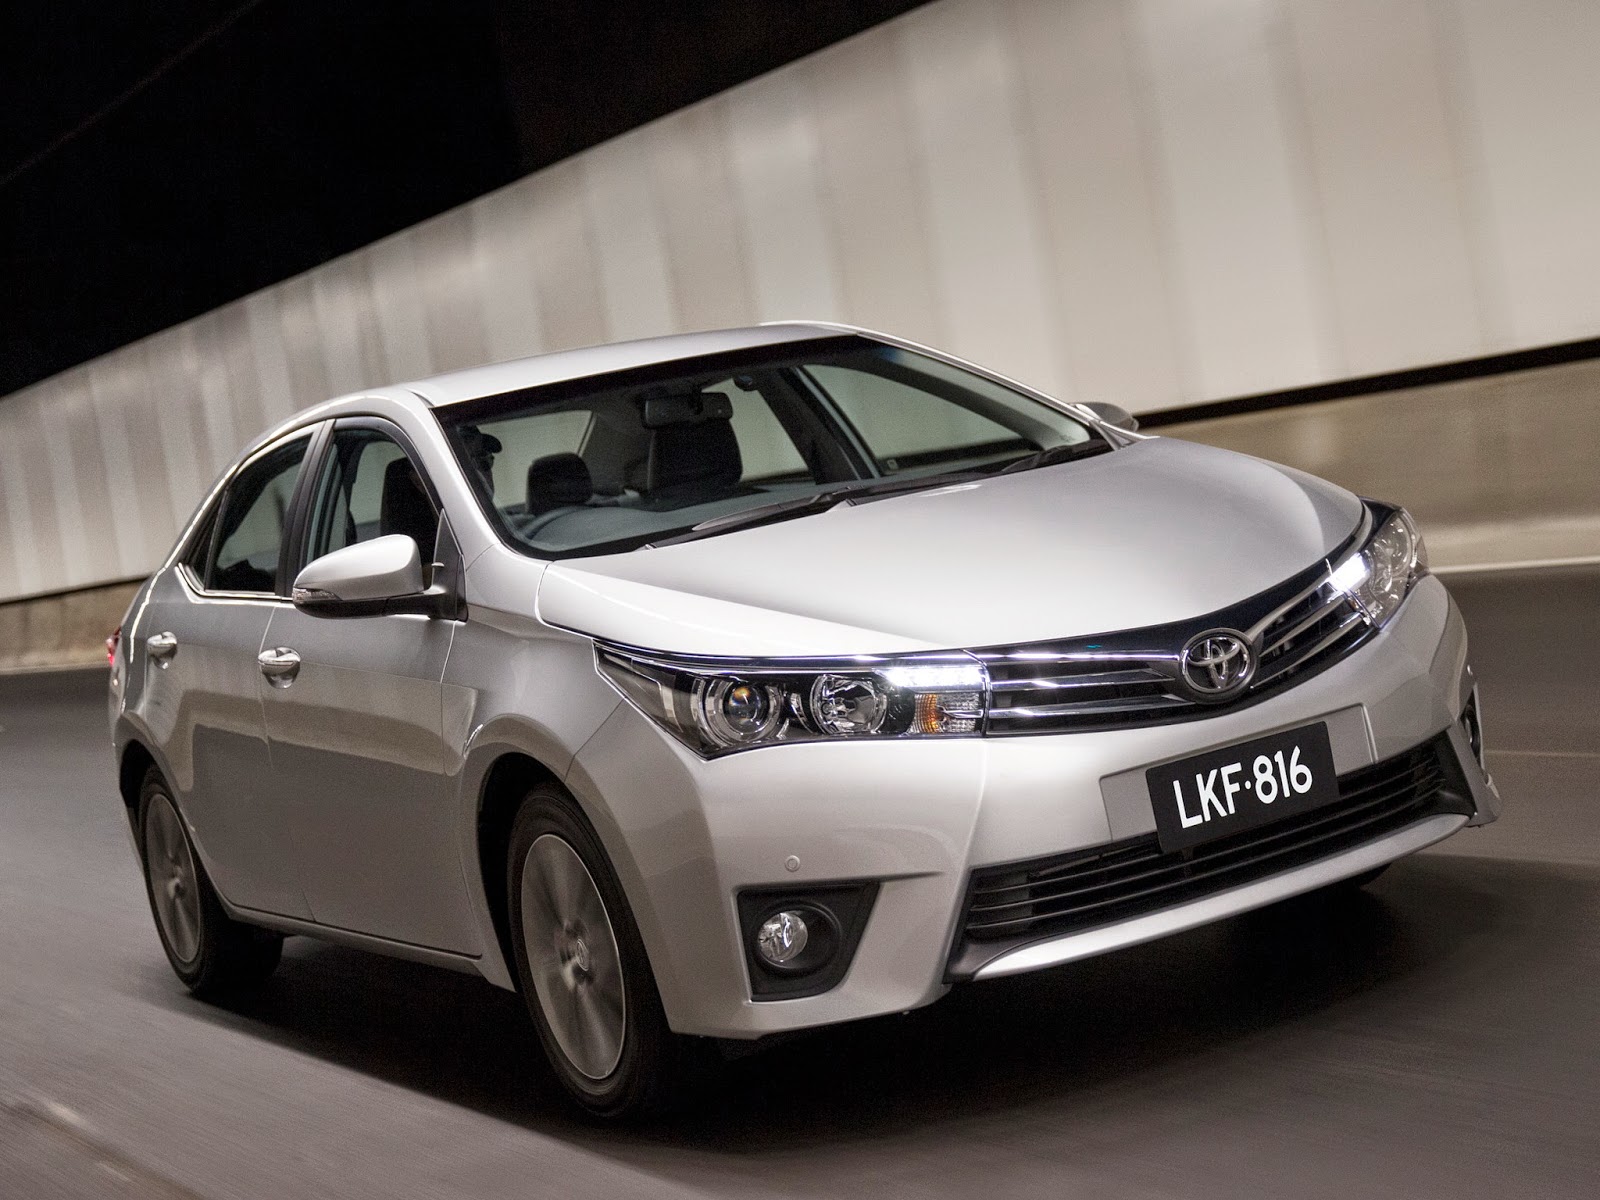 #18 All-New Toyota Corolla – Assertive, practical and appealing